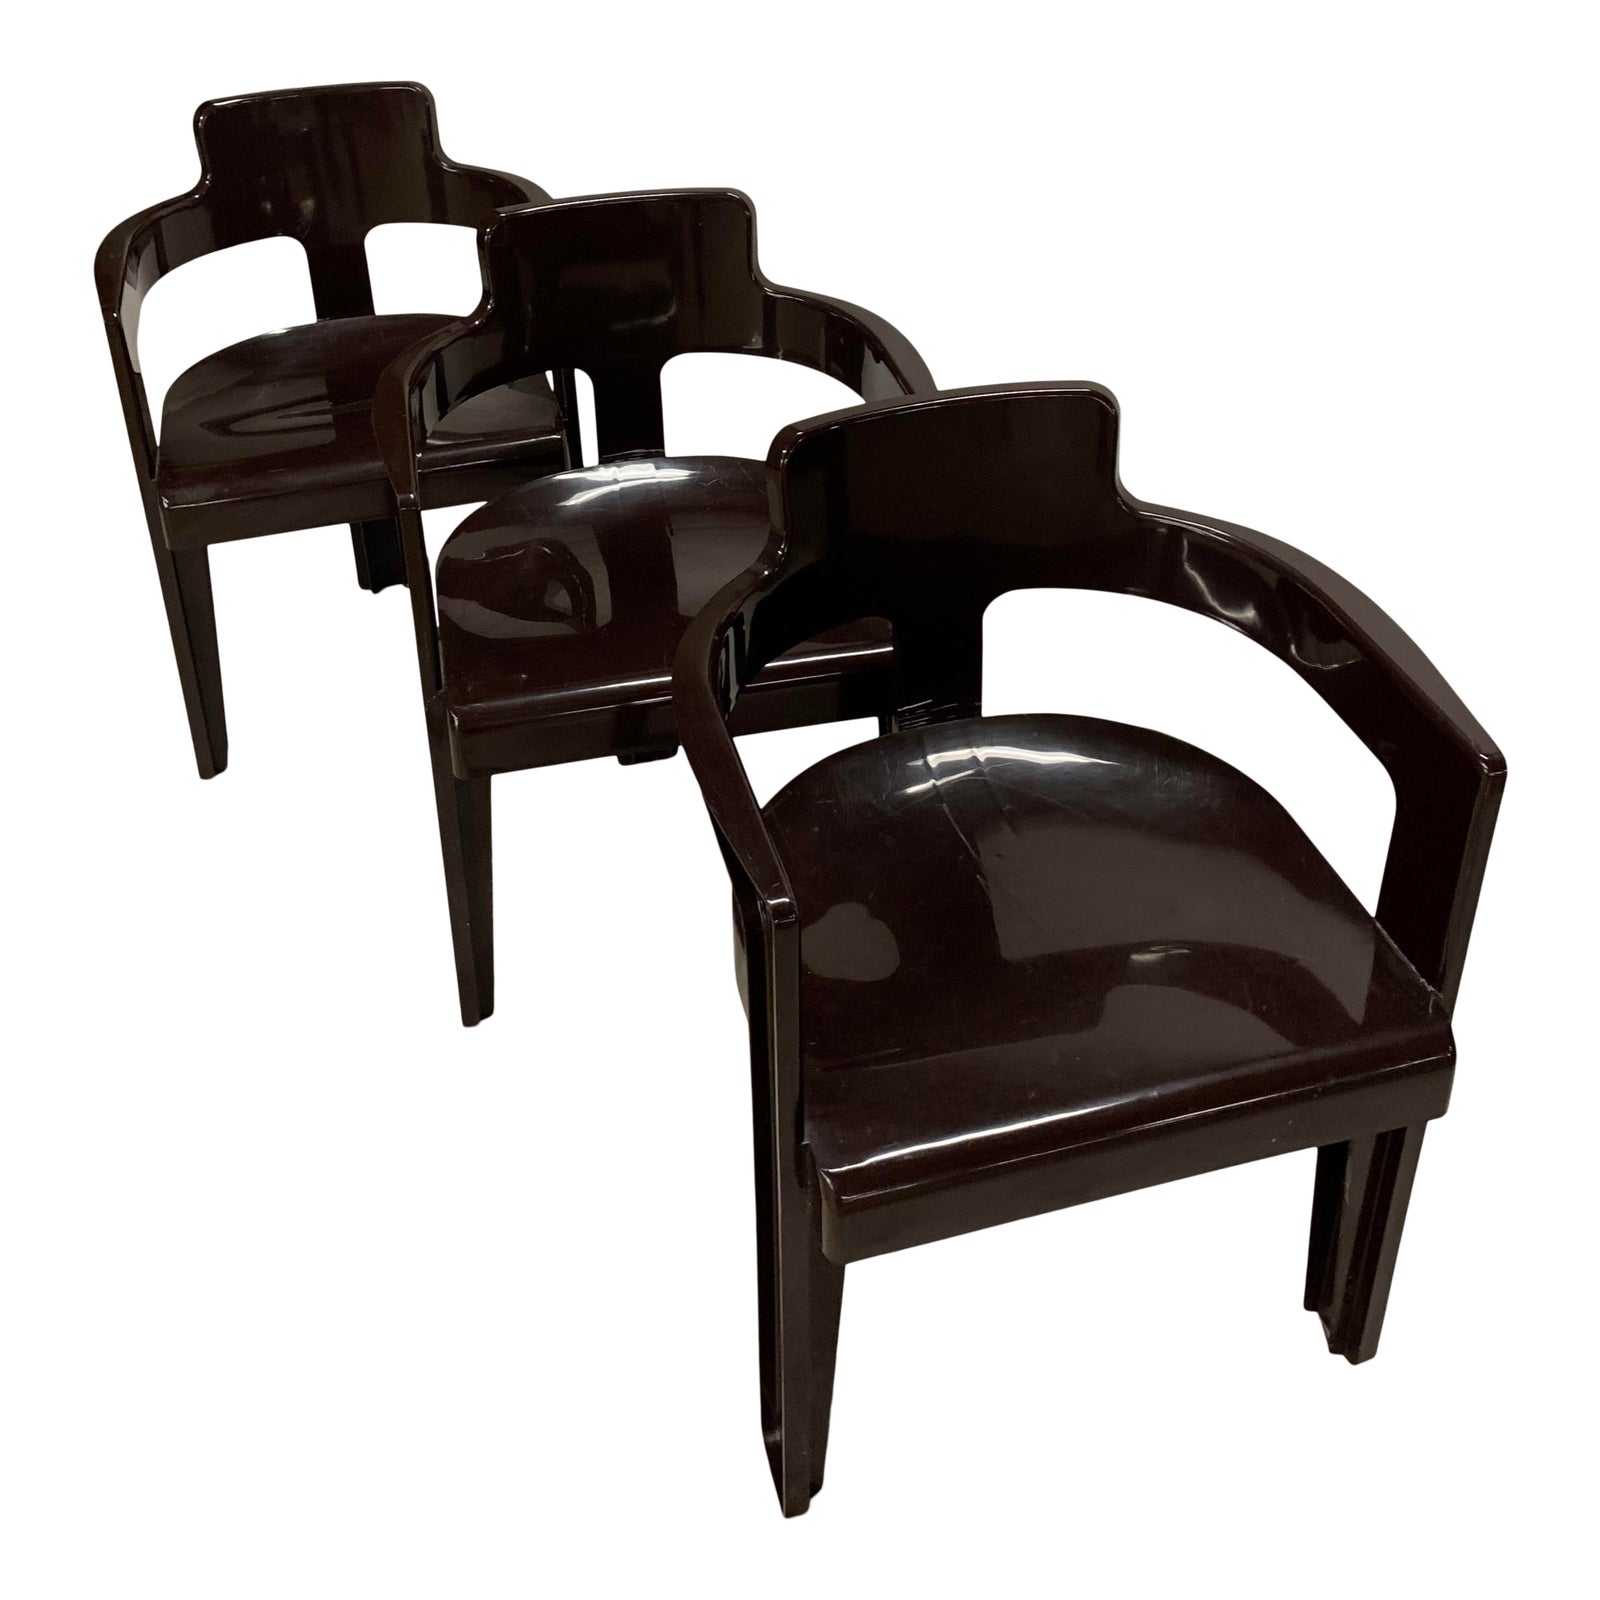 1970s-modern-syroco-molded-plastic-chairs-attributed-set-of-3-7524